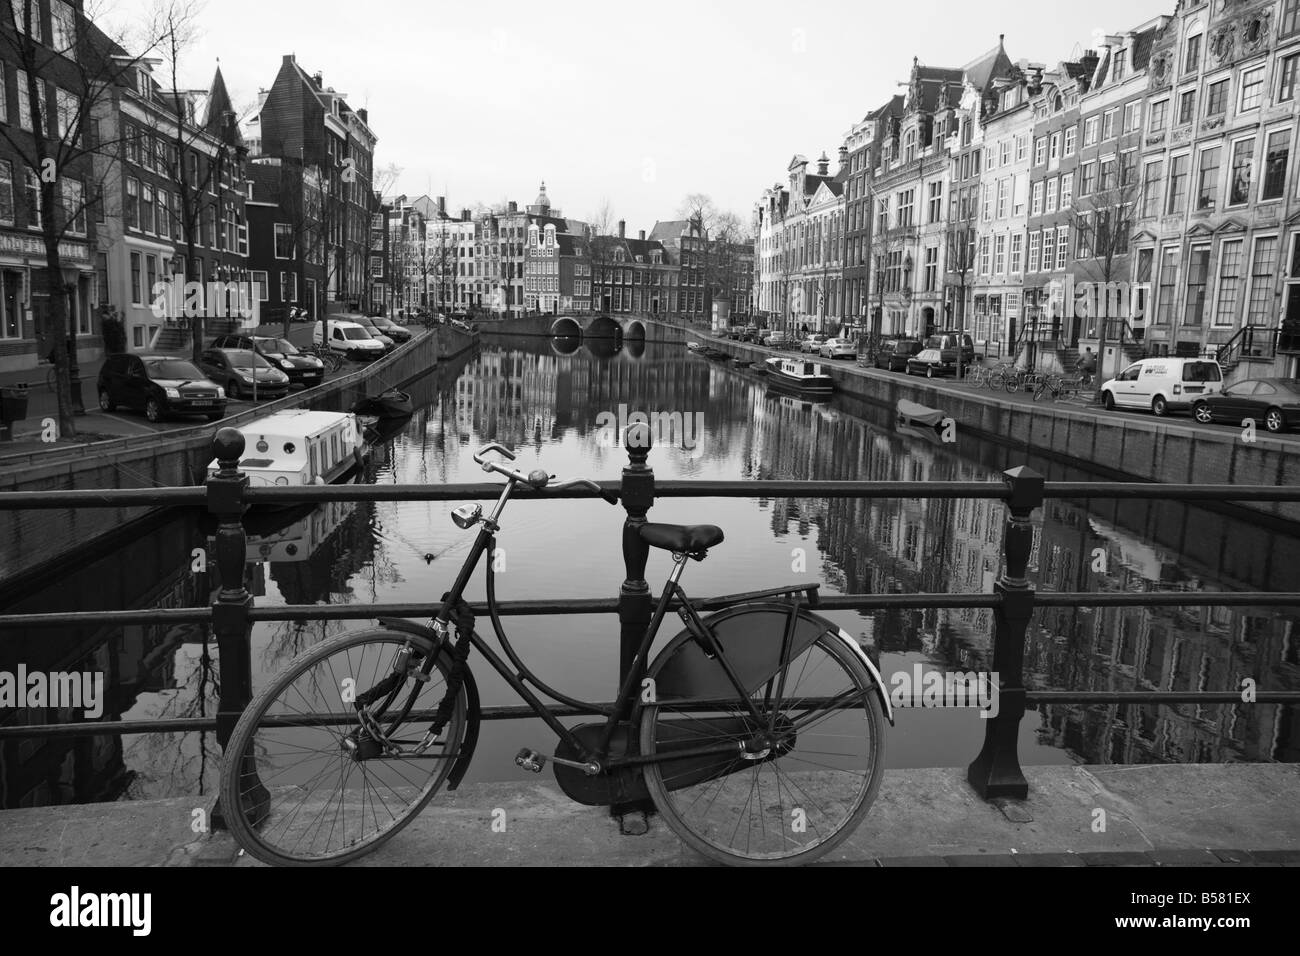 Black and white imge of an old bicycle by the Singel canal, Amsterdam, Netherlands, Europe Stock Photo